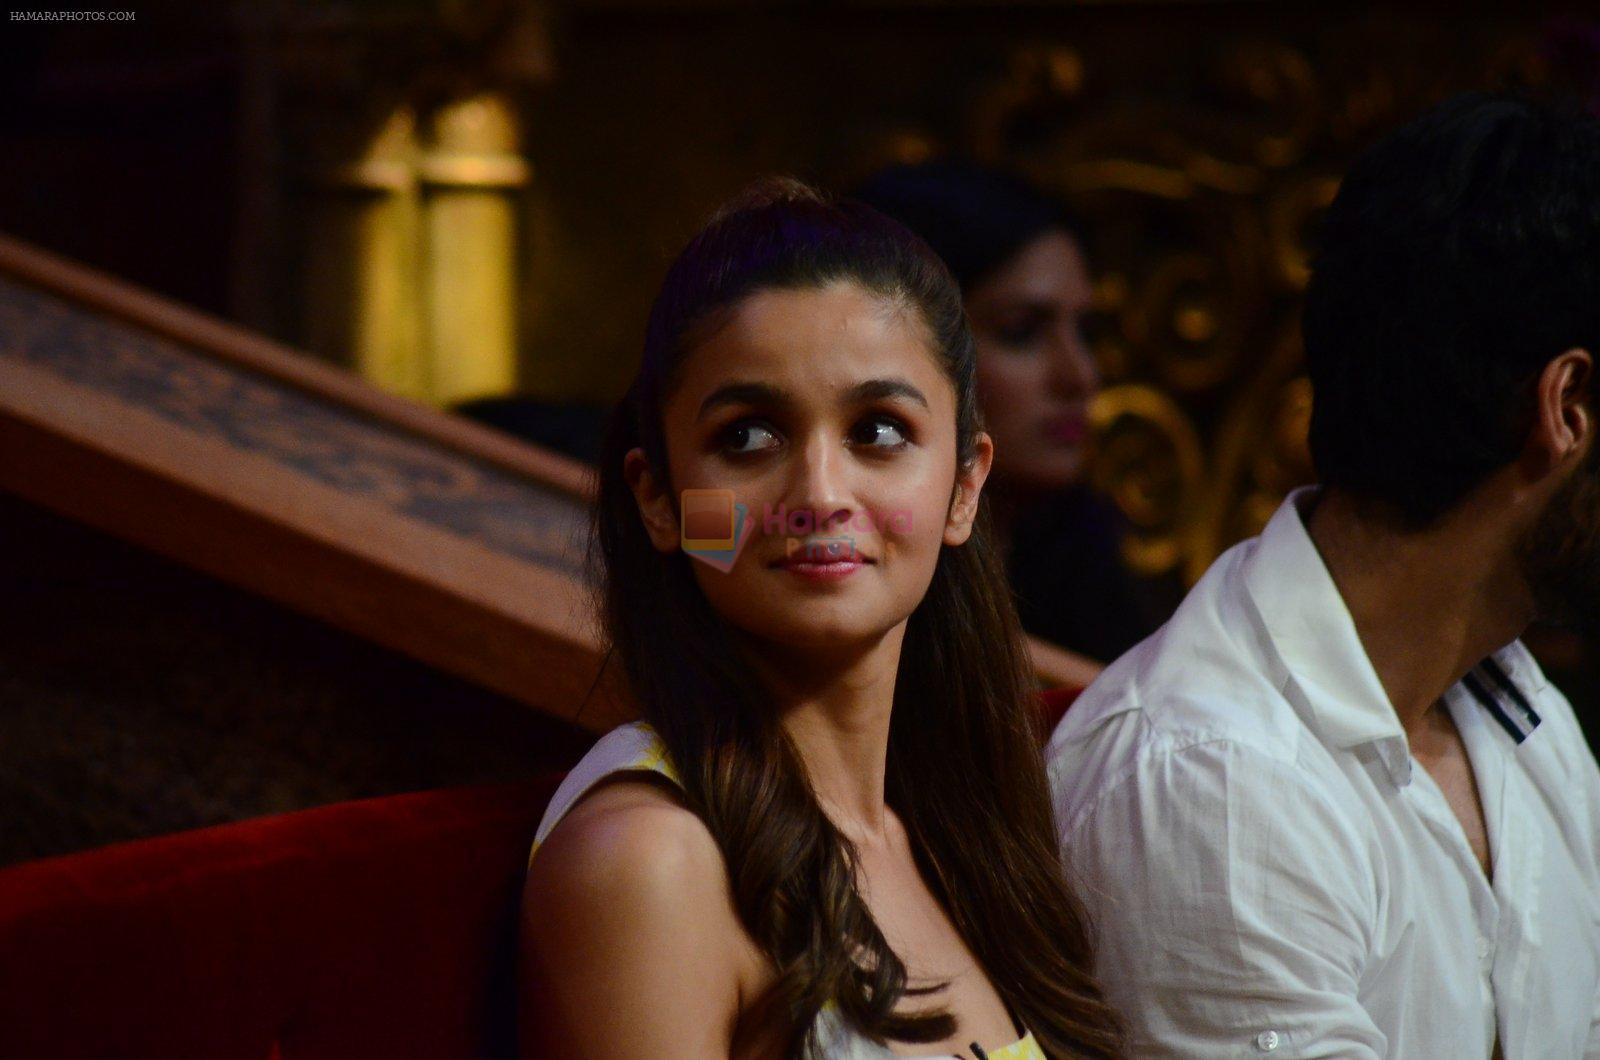 Alia Bhatt at Kapoor N Sons promotions on Comedy Bachao on 4th March 2016